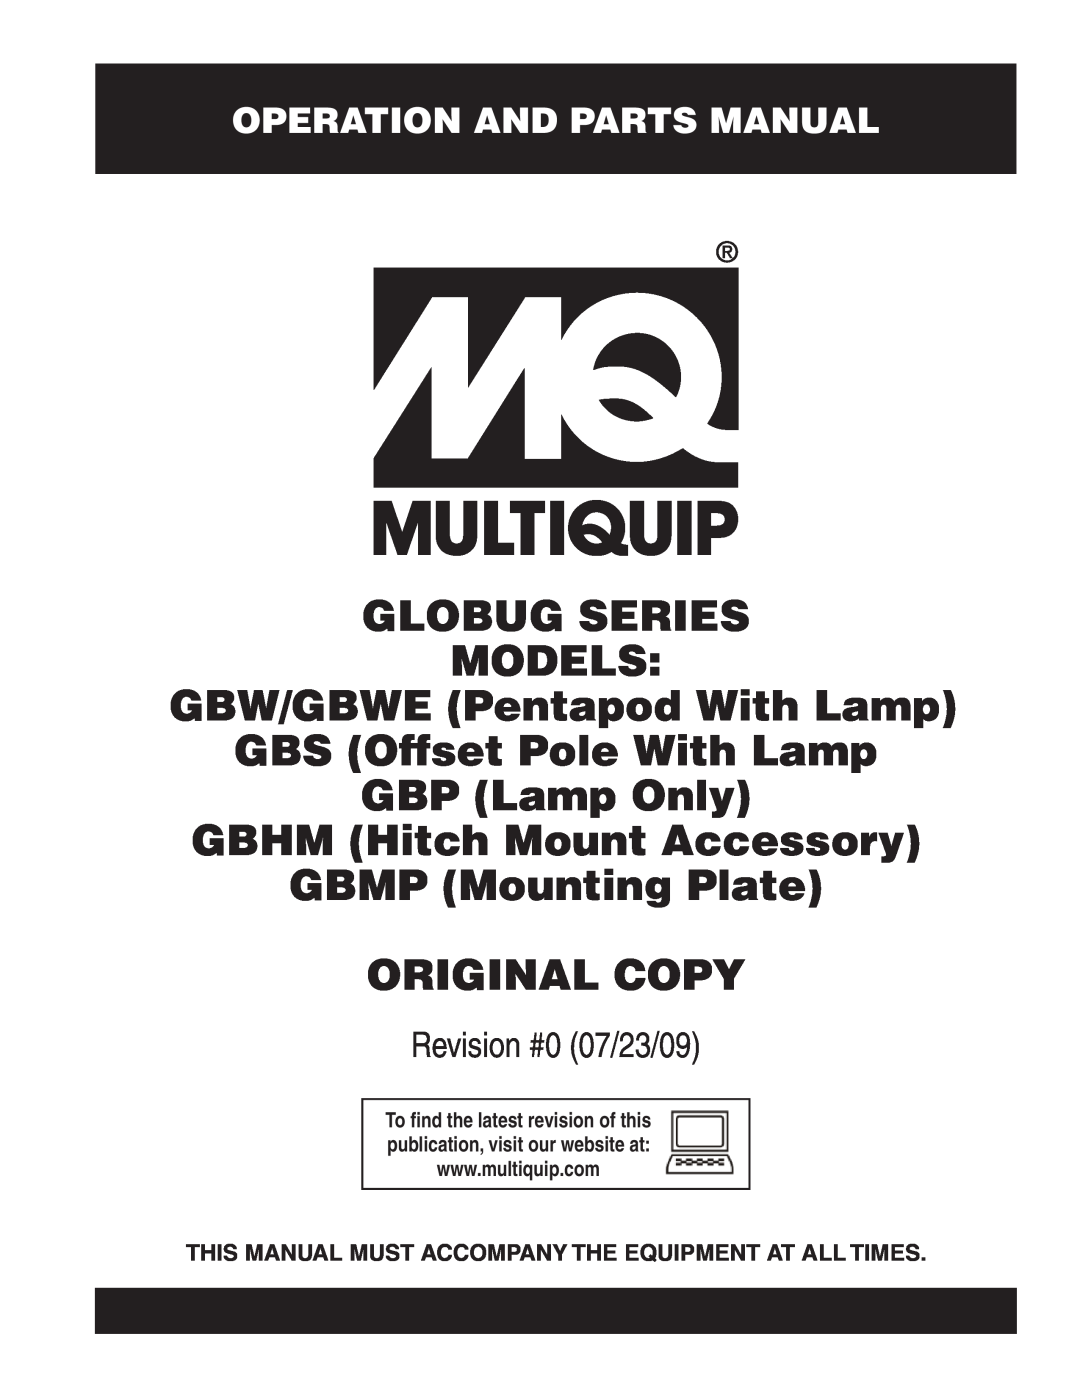 Multiquip GBS, GBWE, BGMP, GBHM manual Operation And Parts Manual, This Manual Must Accompany The Equipment At All Times 